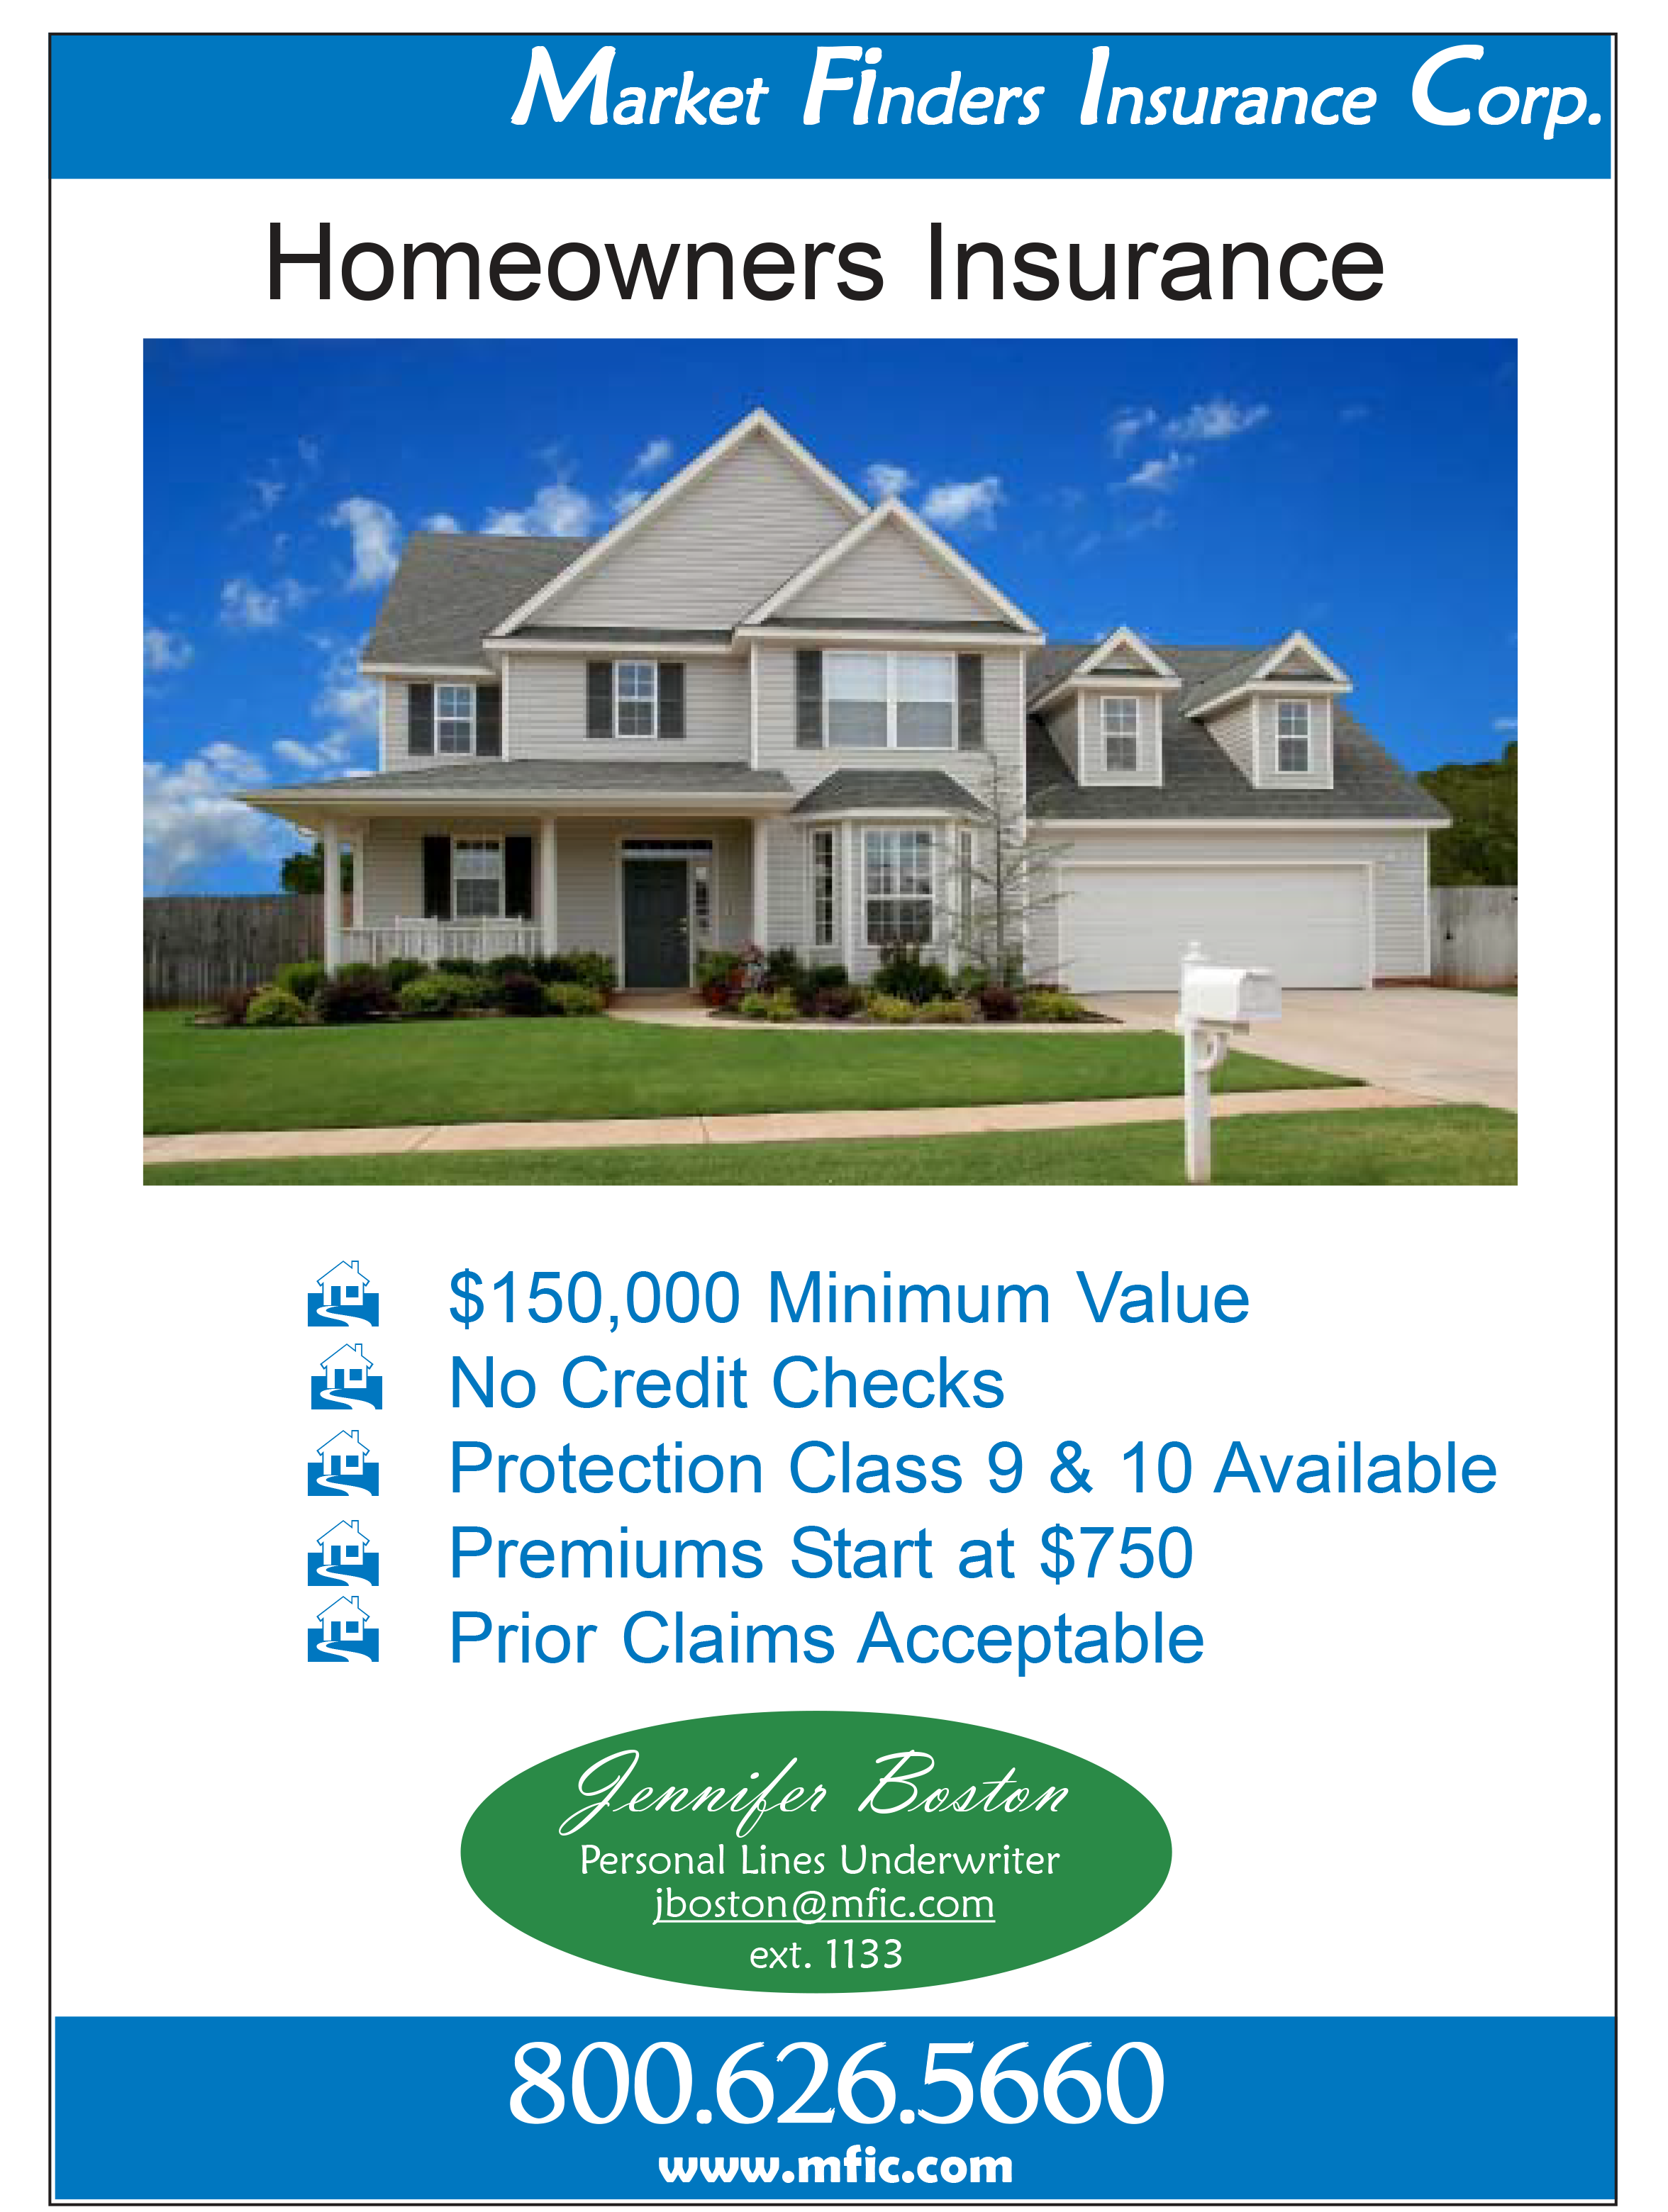 homeowners Market Finders Insurance Corp